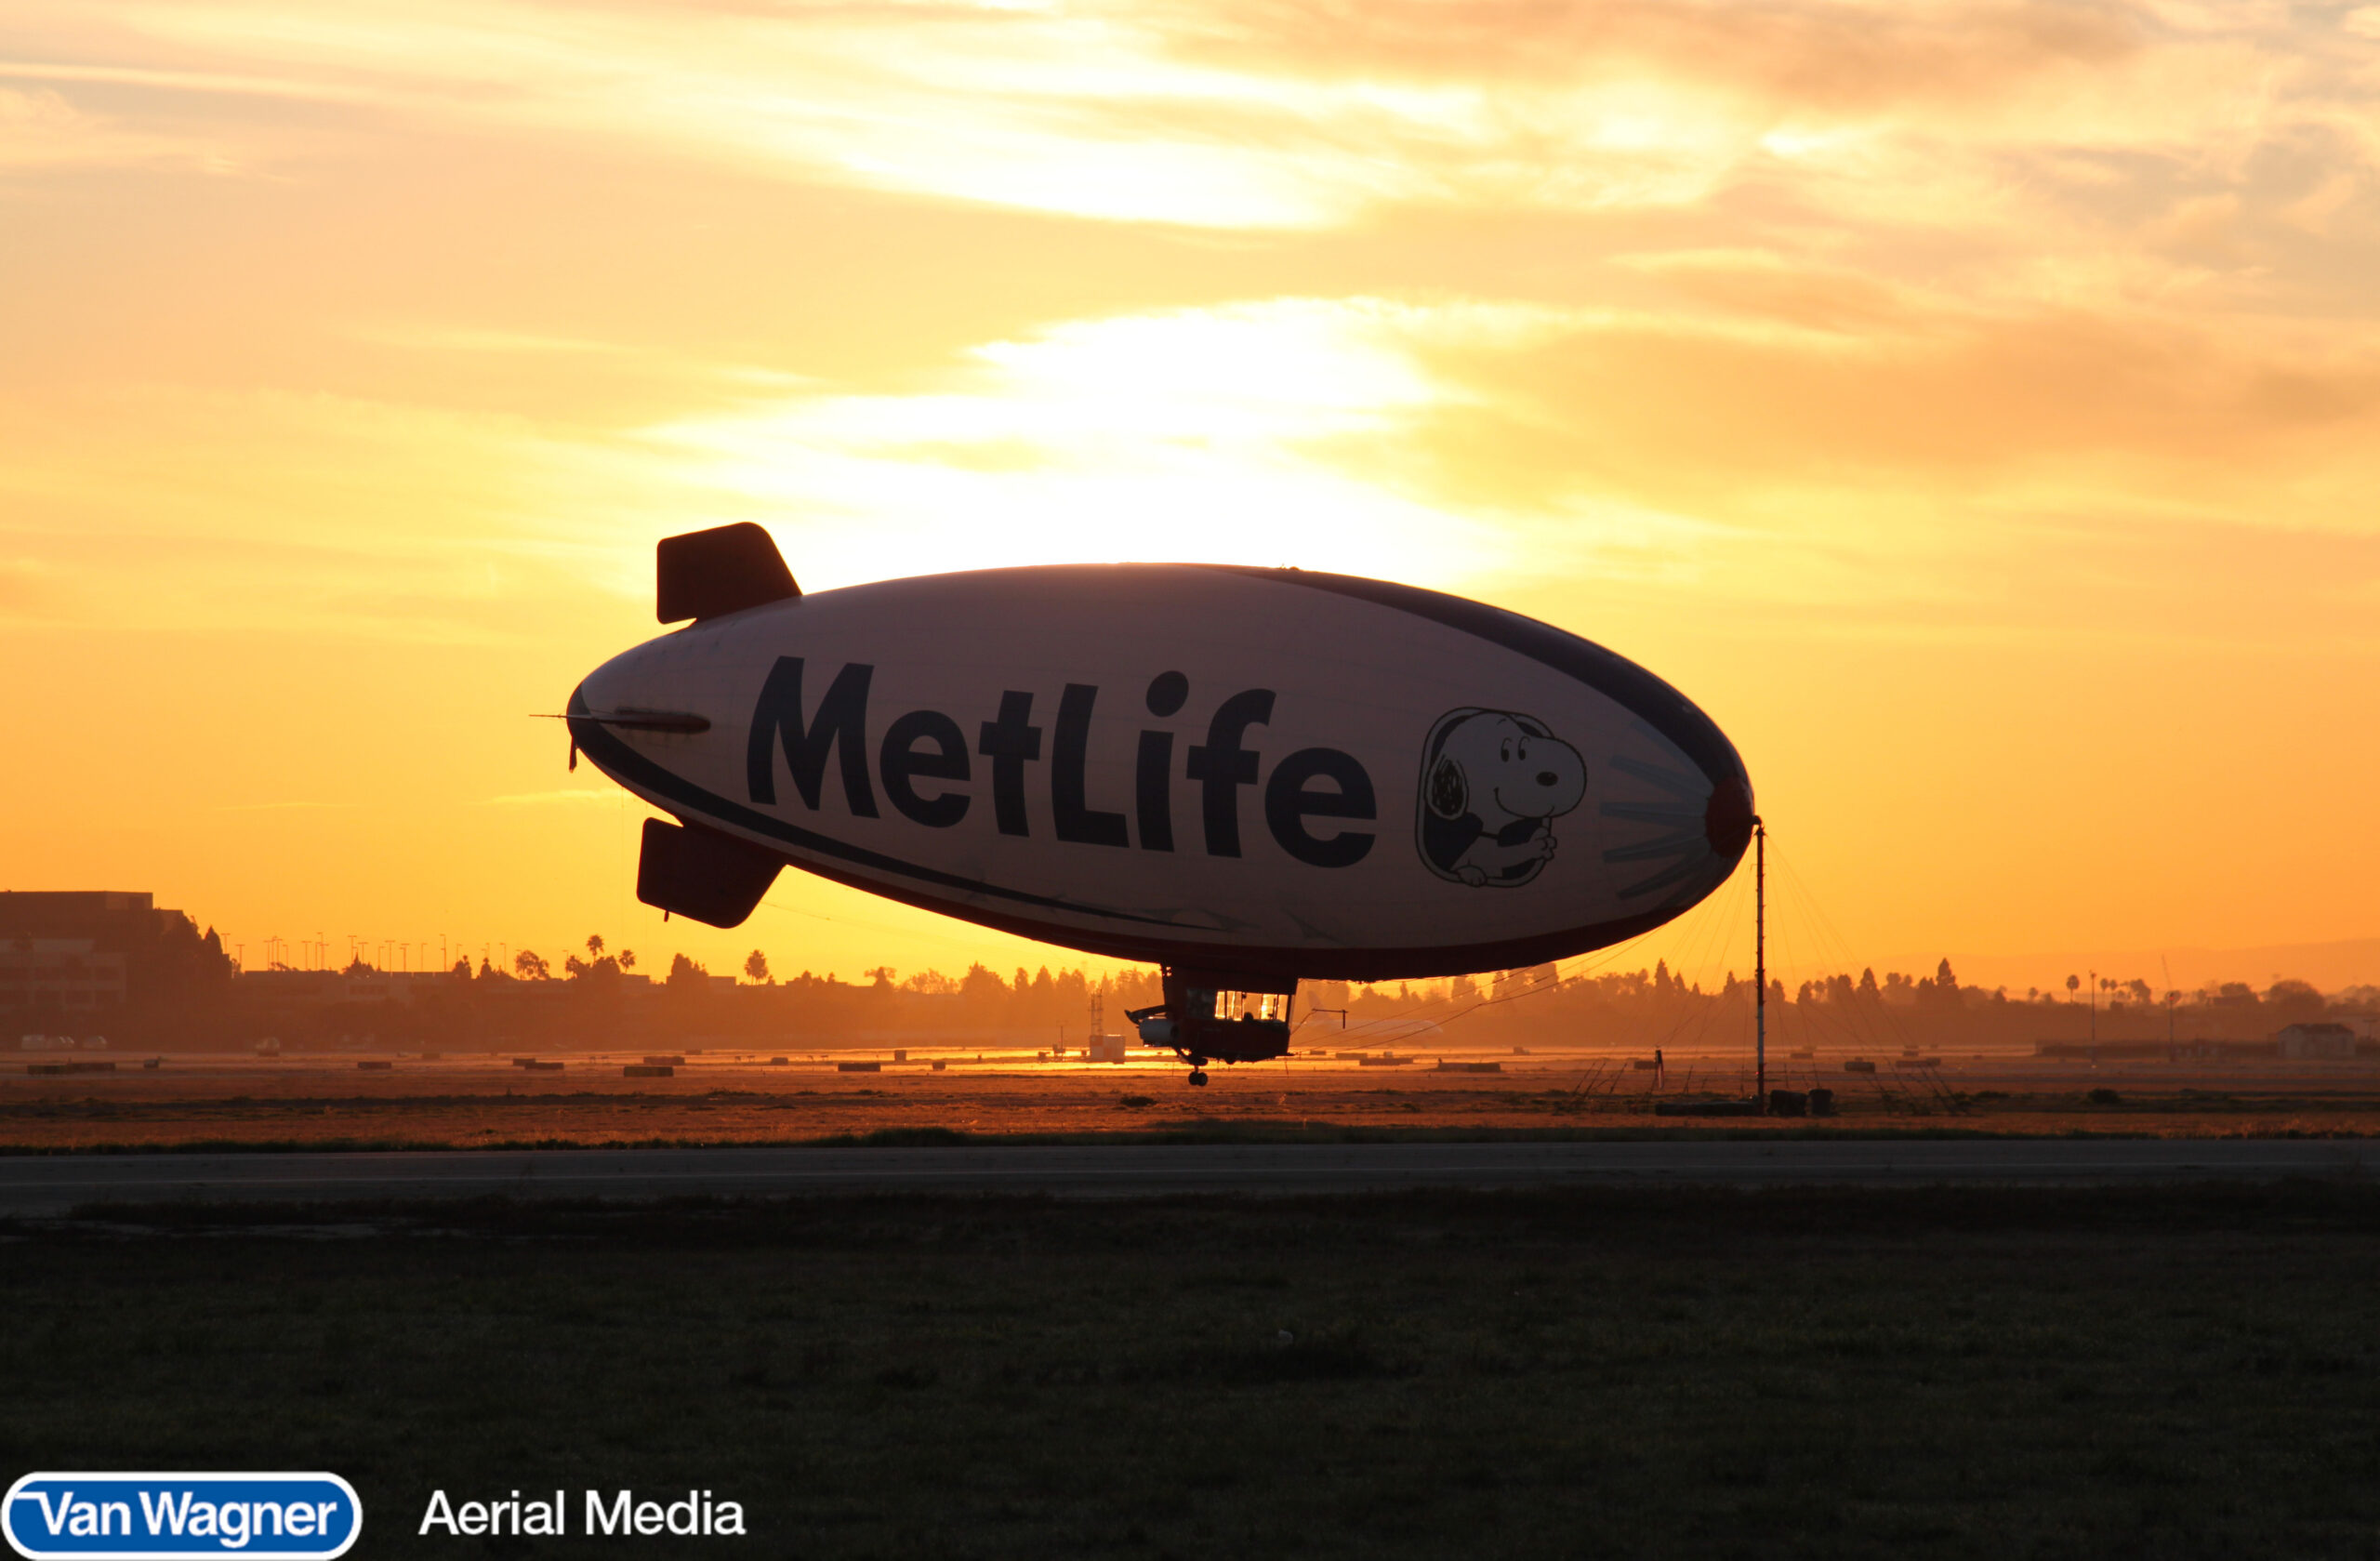 18 Blimp Facts For The Average Av Geek featured image